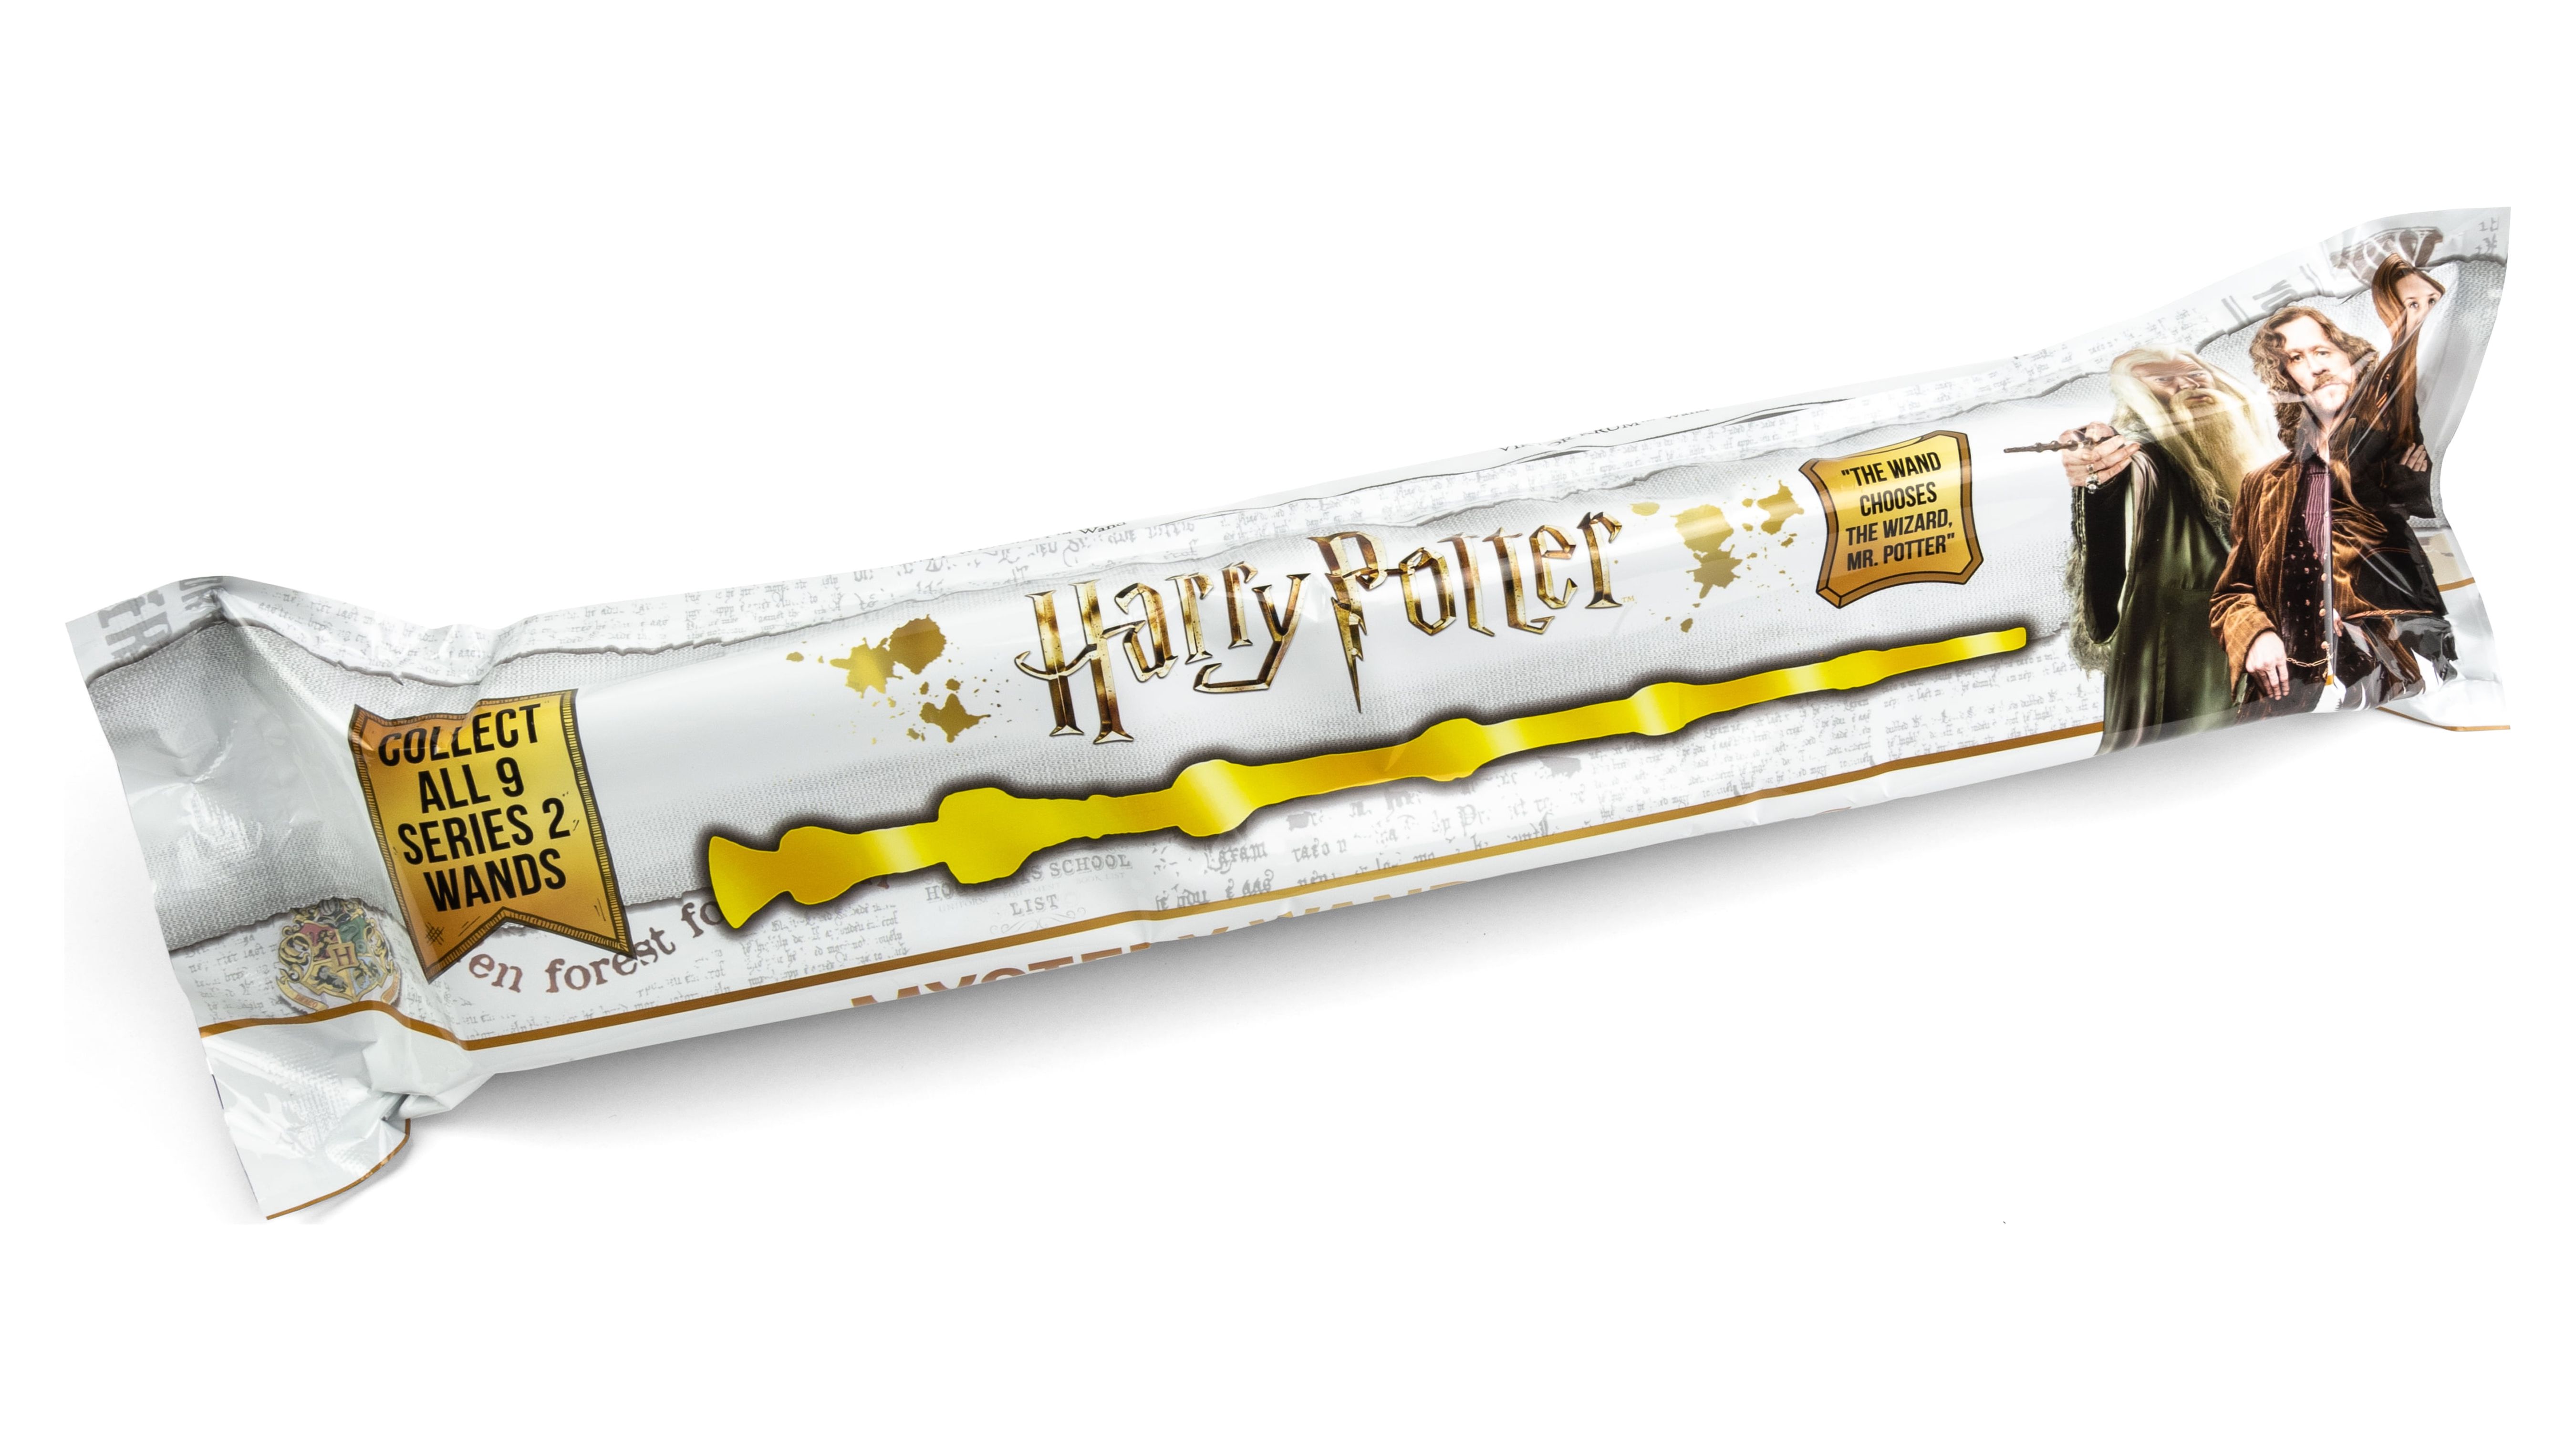 Noble Collections Harry Potter Mystery Wand Series 2 - Contains 1 of 9 Random Styles for Unboxing - image 1 of 3